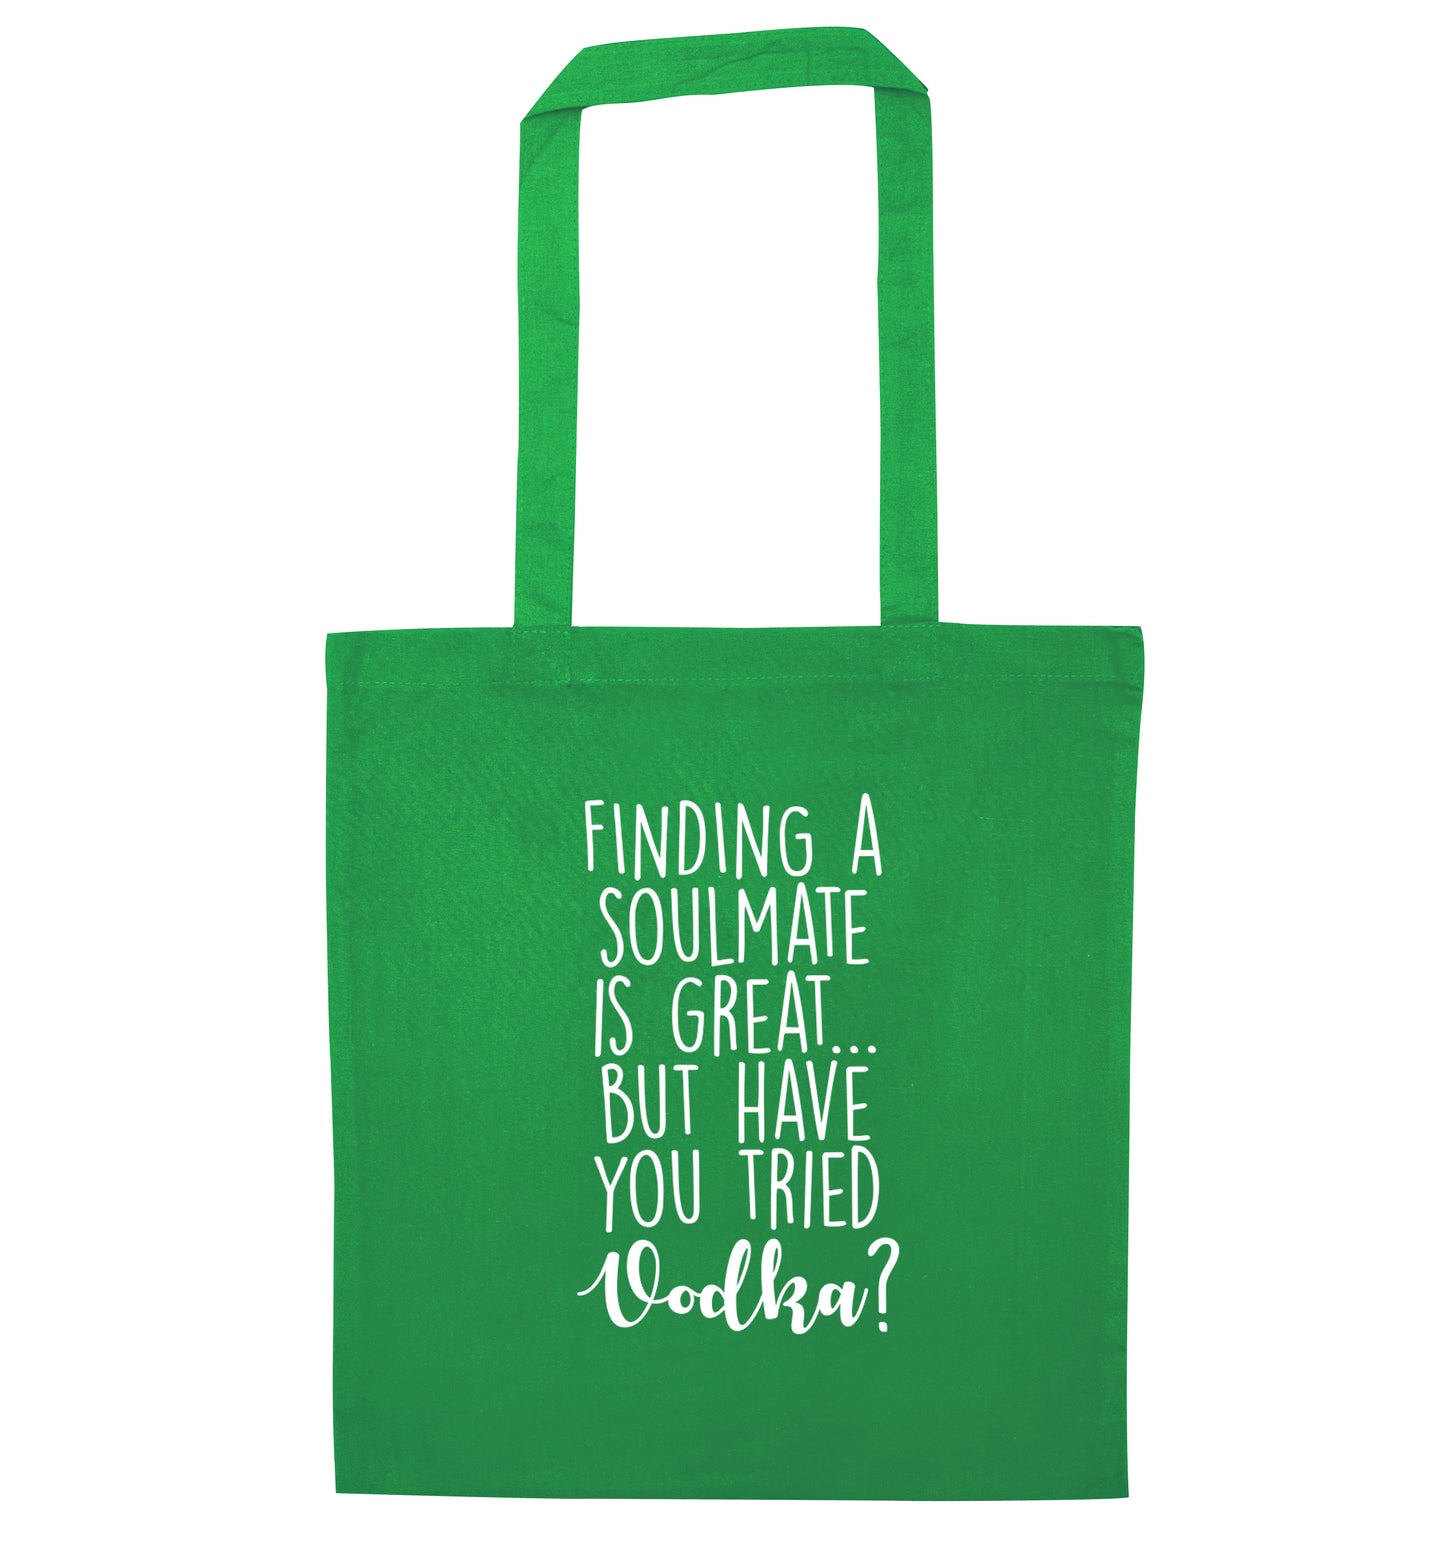 Finding a soulmate is great but have you tried vodka? green tote bag